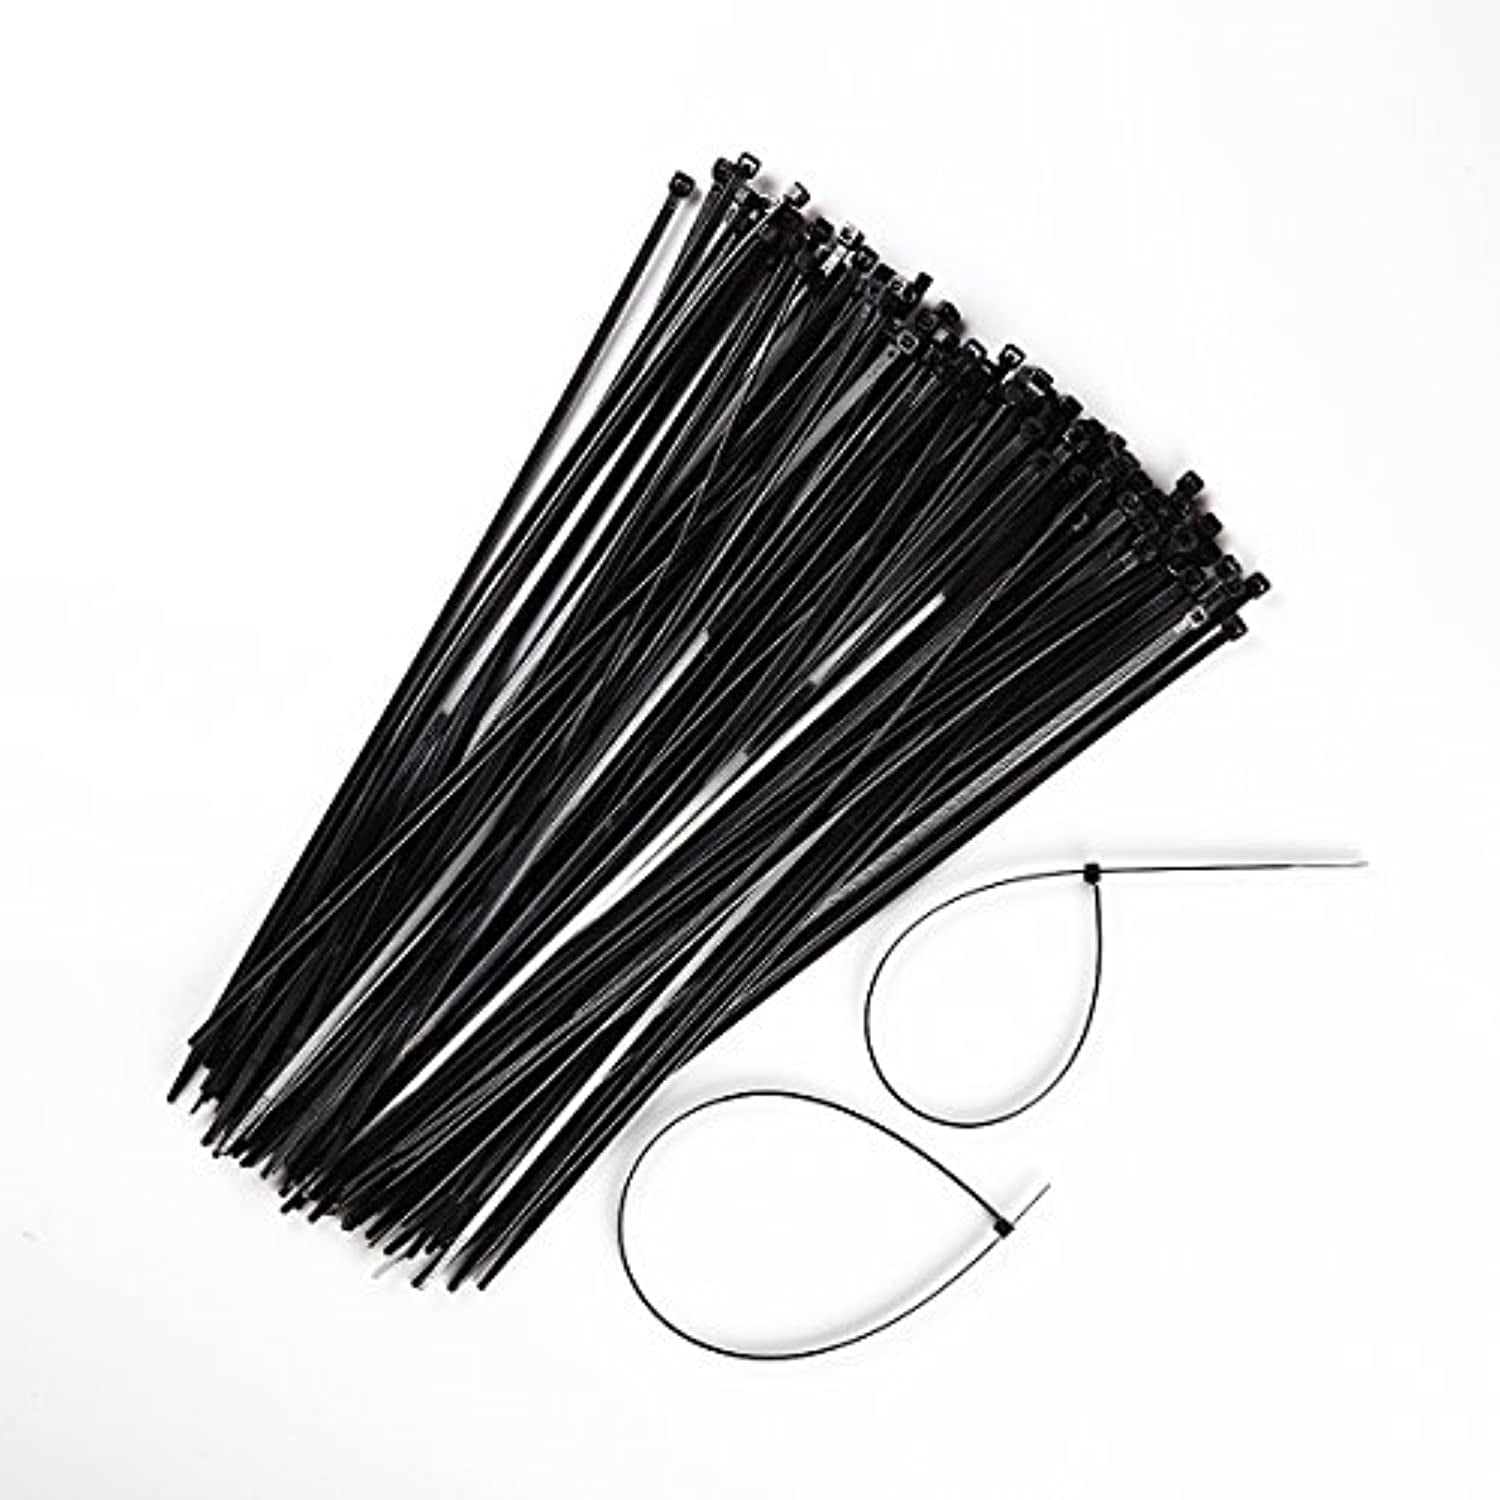 VELCRO Brand ONE-WRAP Cable Ties , Black Cord Organization Straps